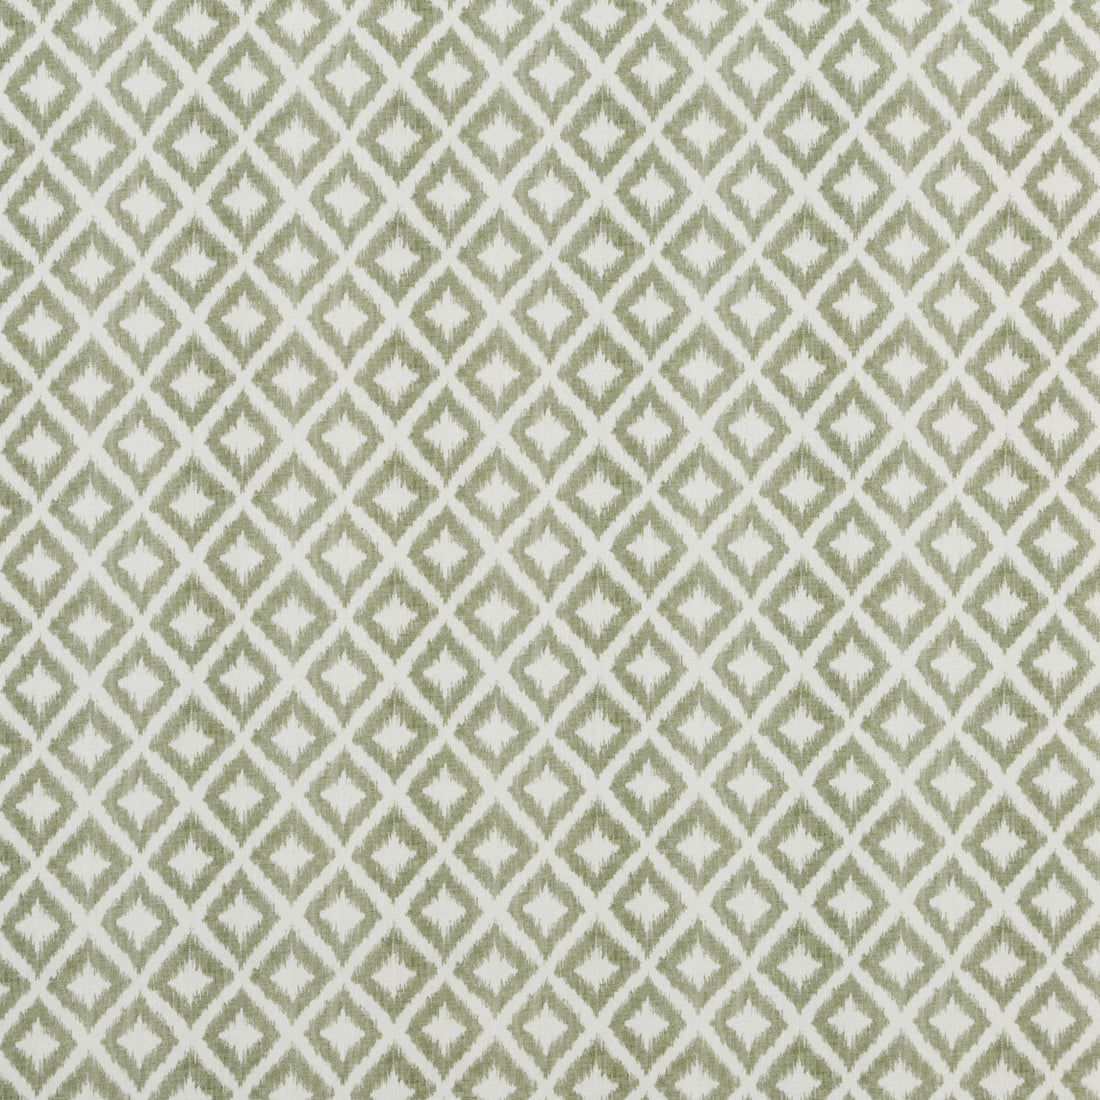 Salsa Diamond fabric in stone color - pattern PP50431.1.0 - by Baker Lifestyle in the Carnival collection